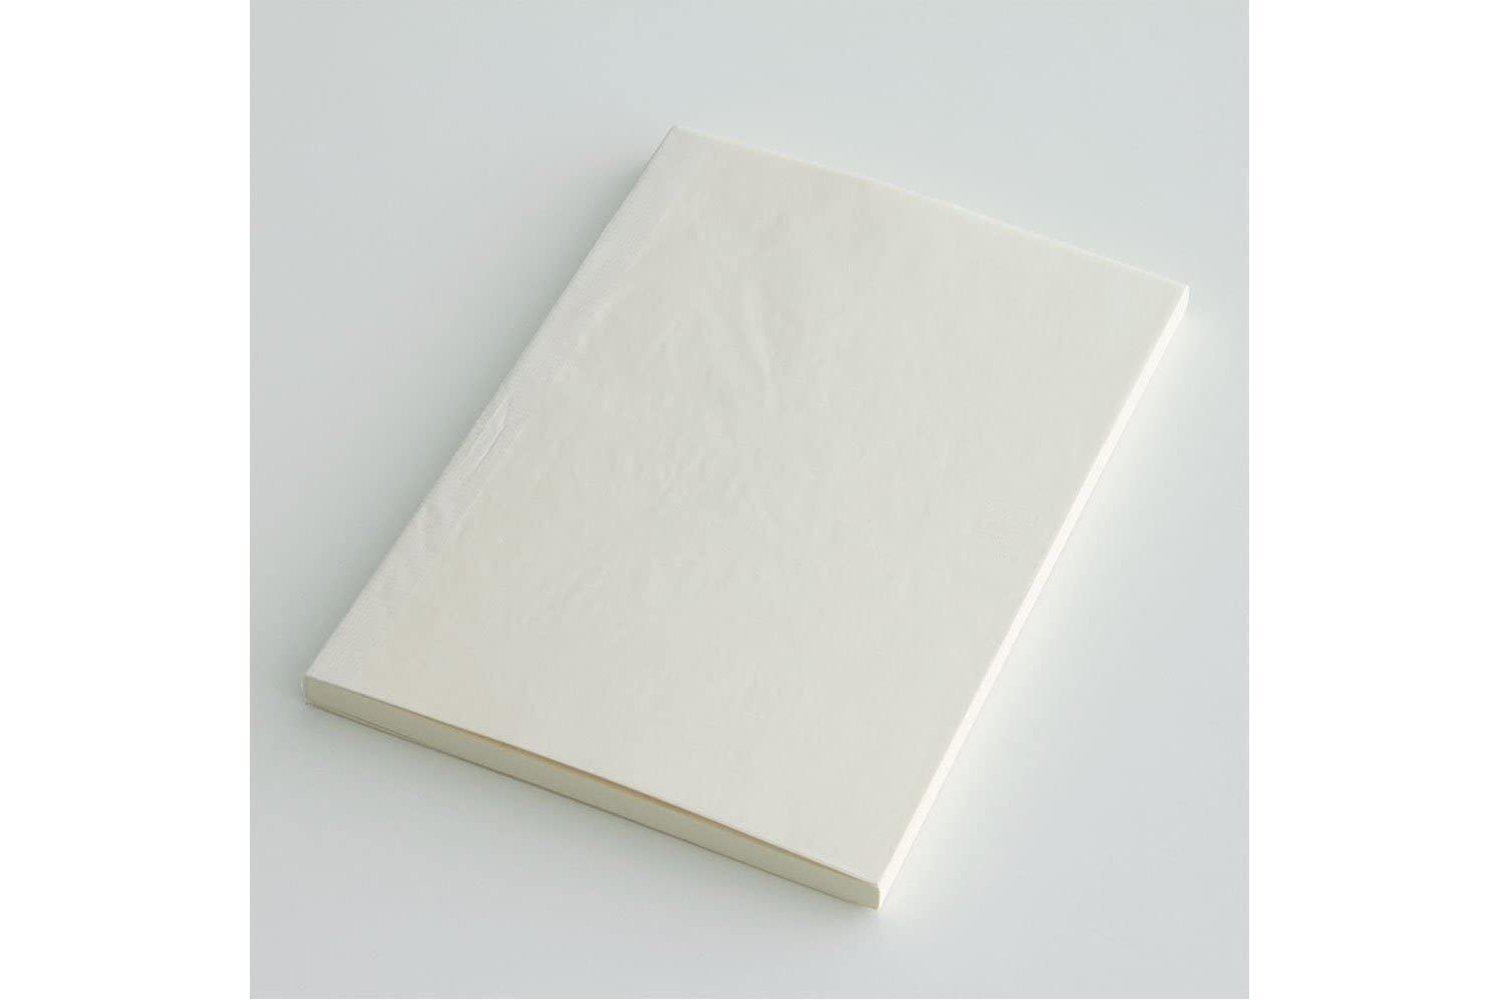 Midori MD Notebook A5 – Soft Cover, 176 Blank – Cream/Ivory